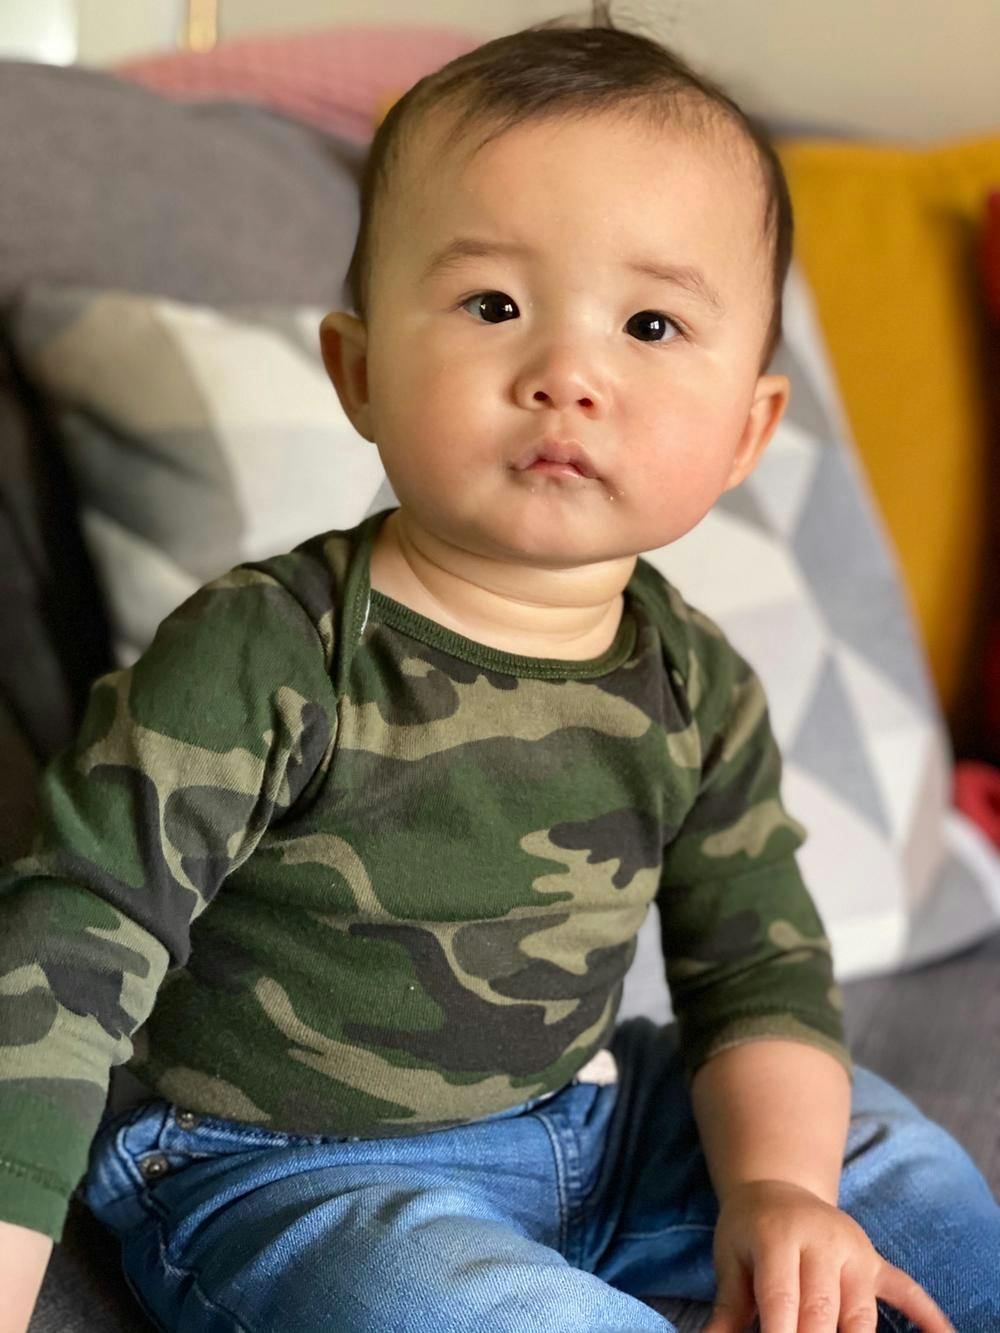 Rob's young child sitting up by himself in a green camo shirt and jeans